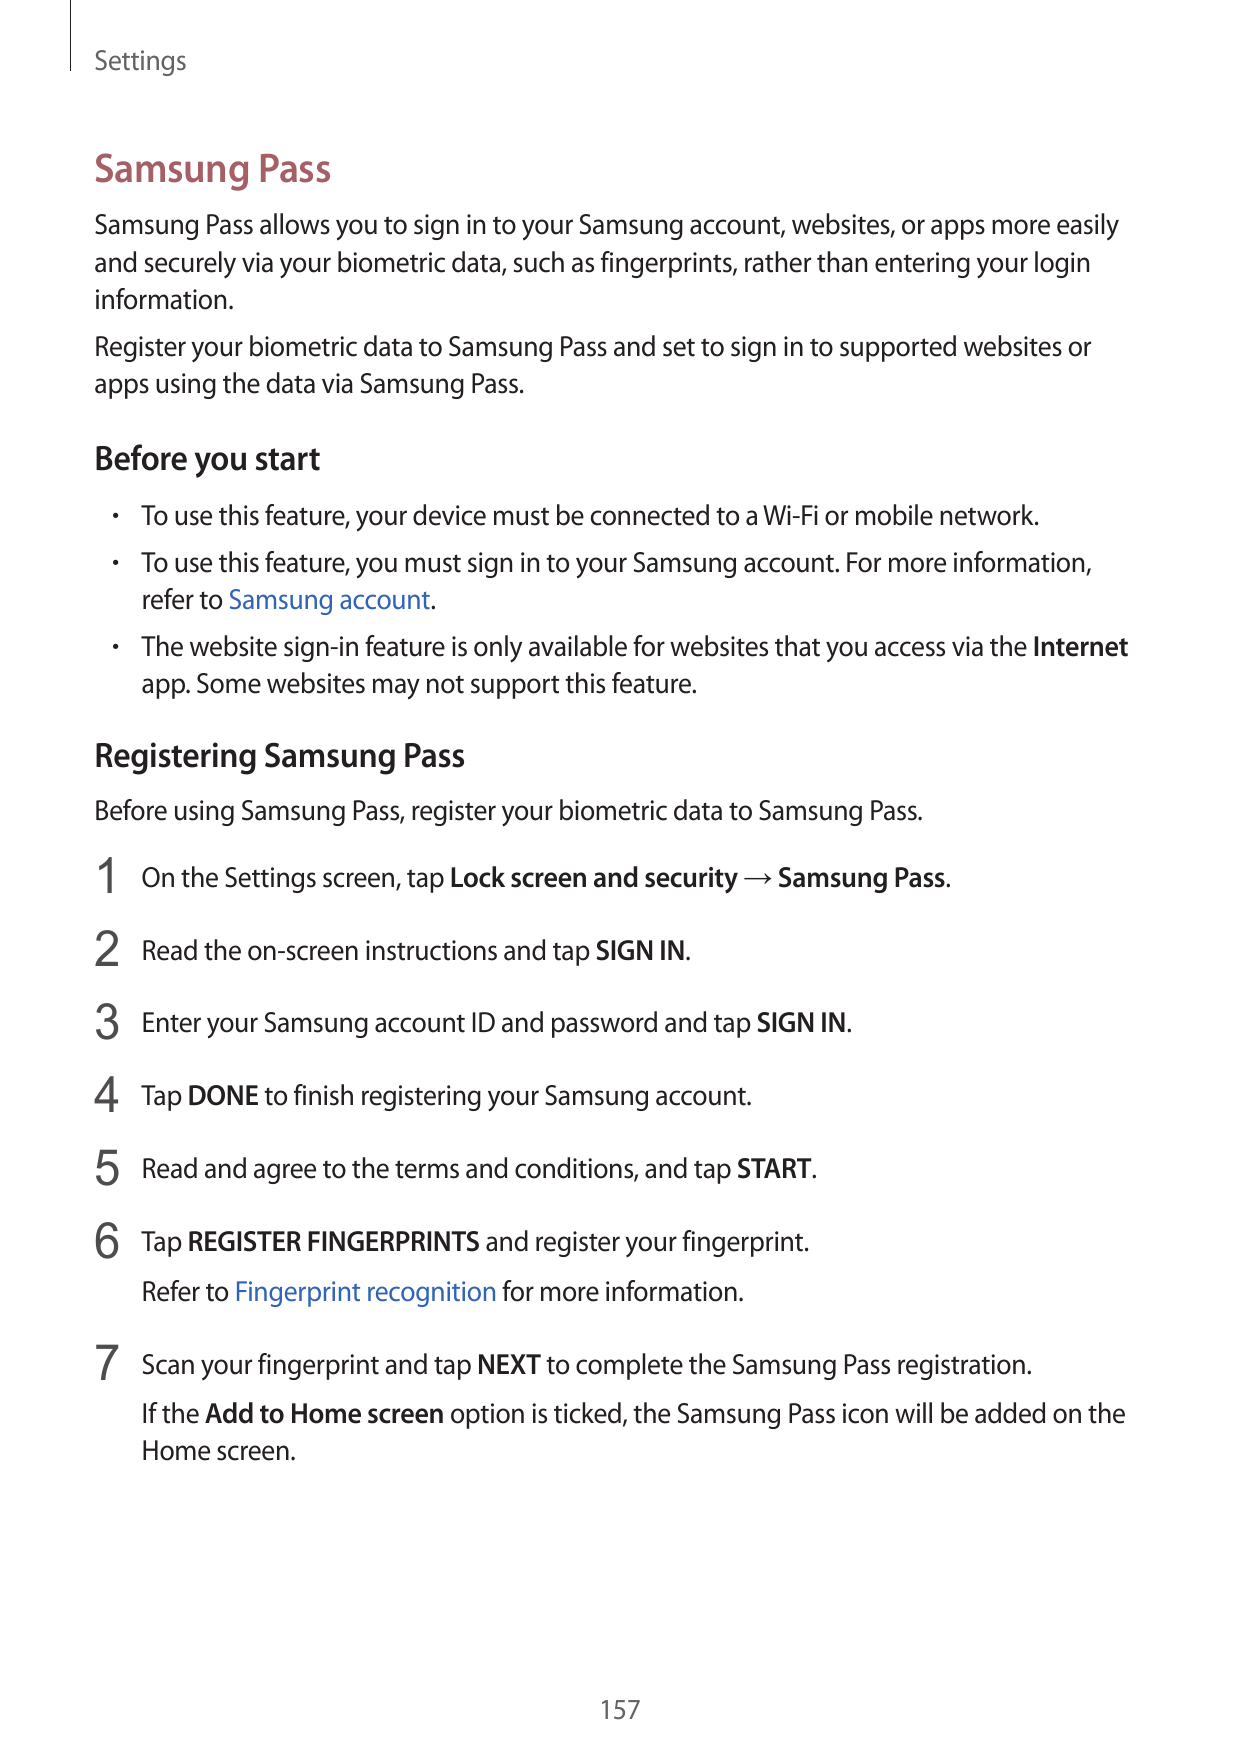 SettingsSamsung PassSamsung Pass allows you to sign in to your Samsung account, websites, or apps more easilyand securely via yo